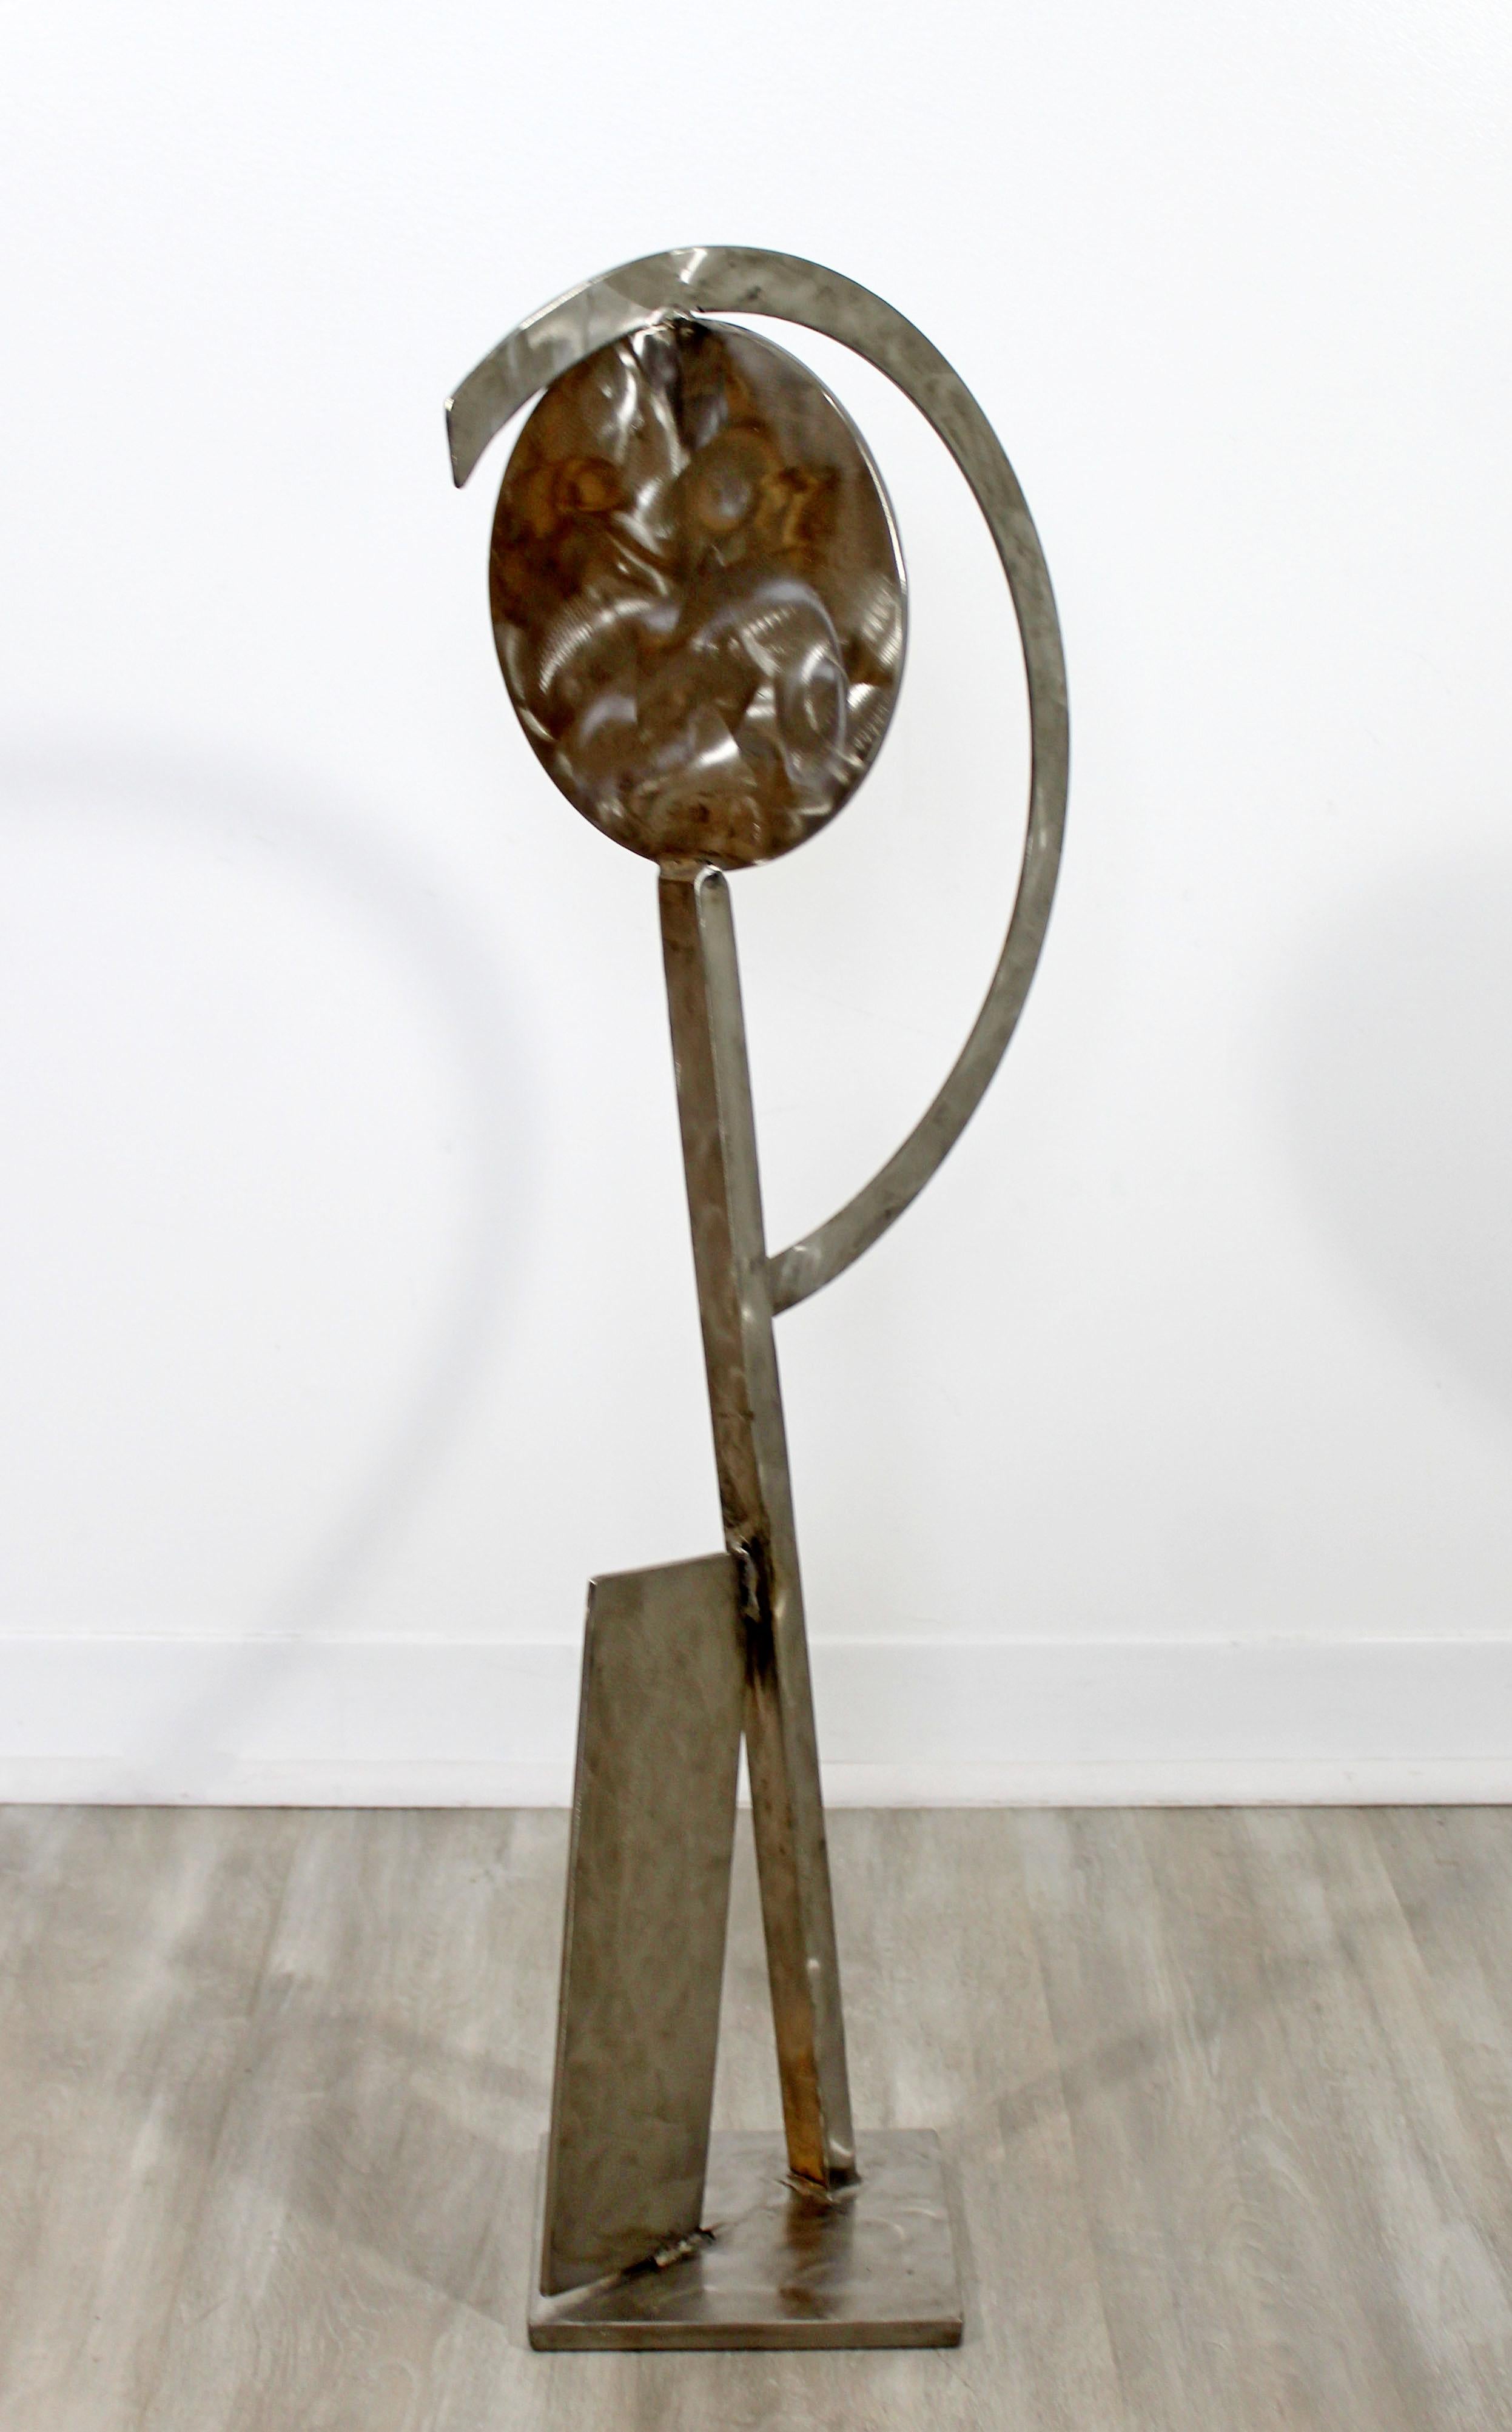 American Contemporary Stainless Steel Abstract Table Floor Sculpture by Robert Hansen